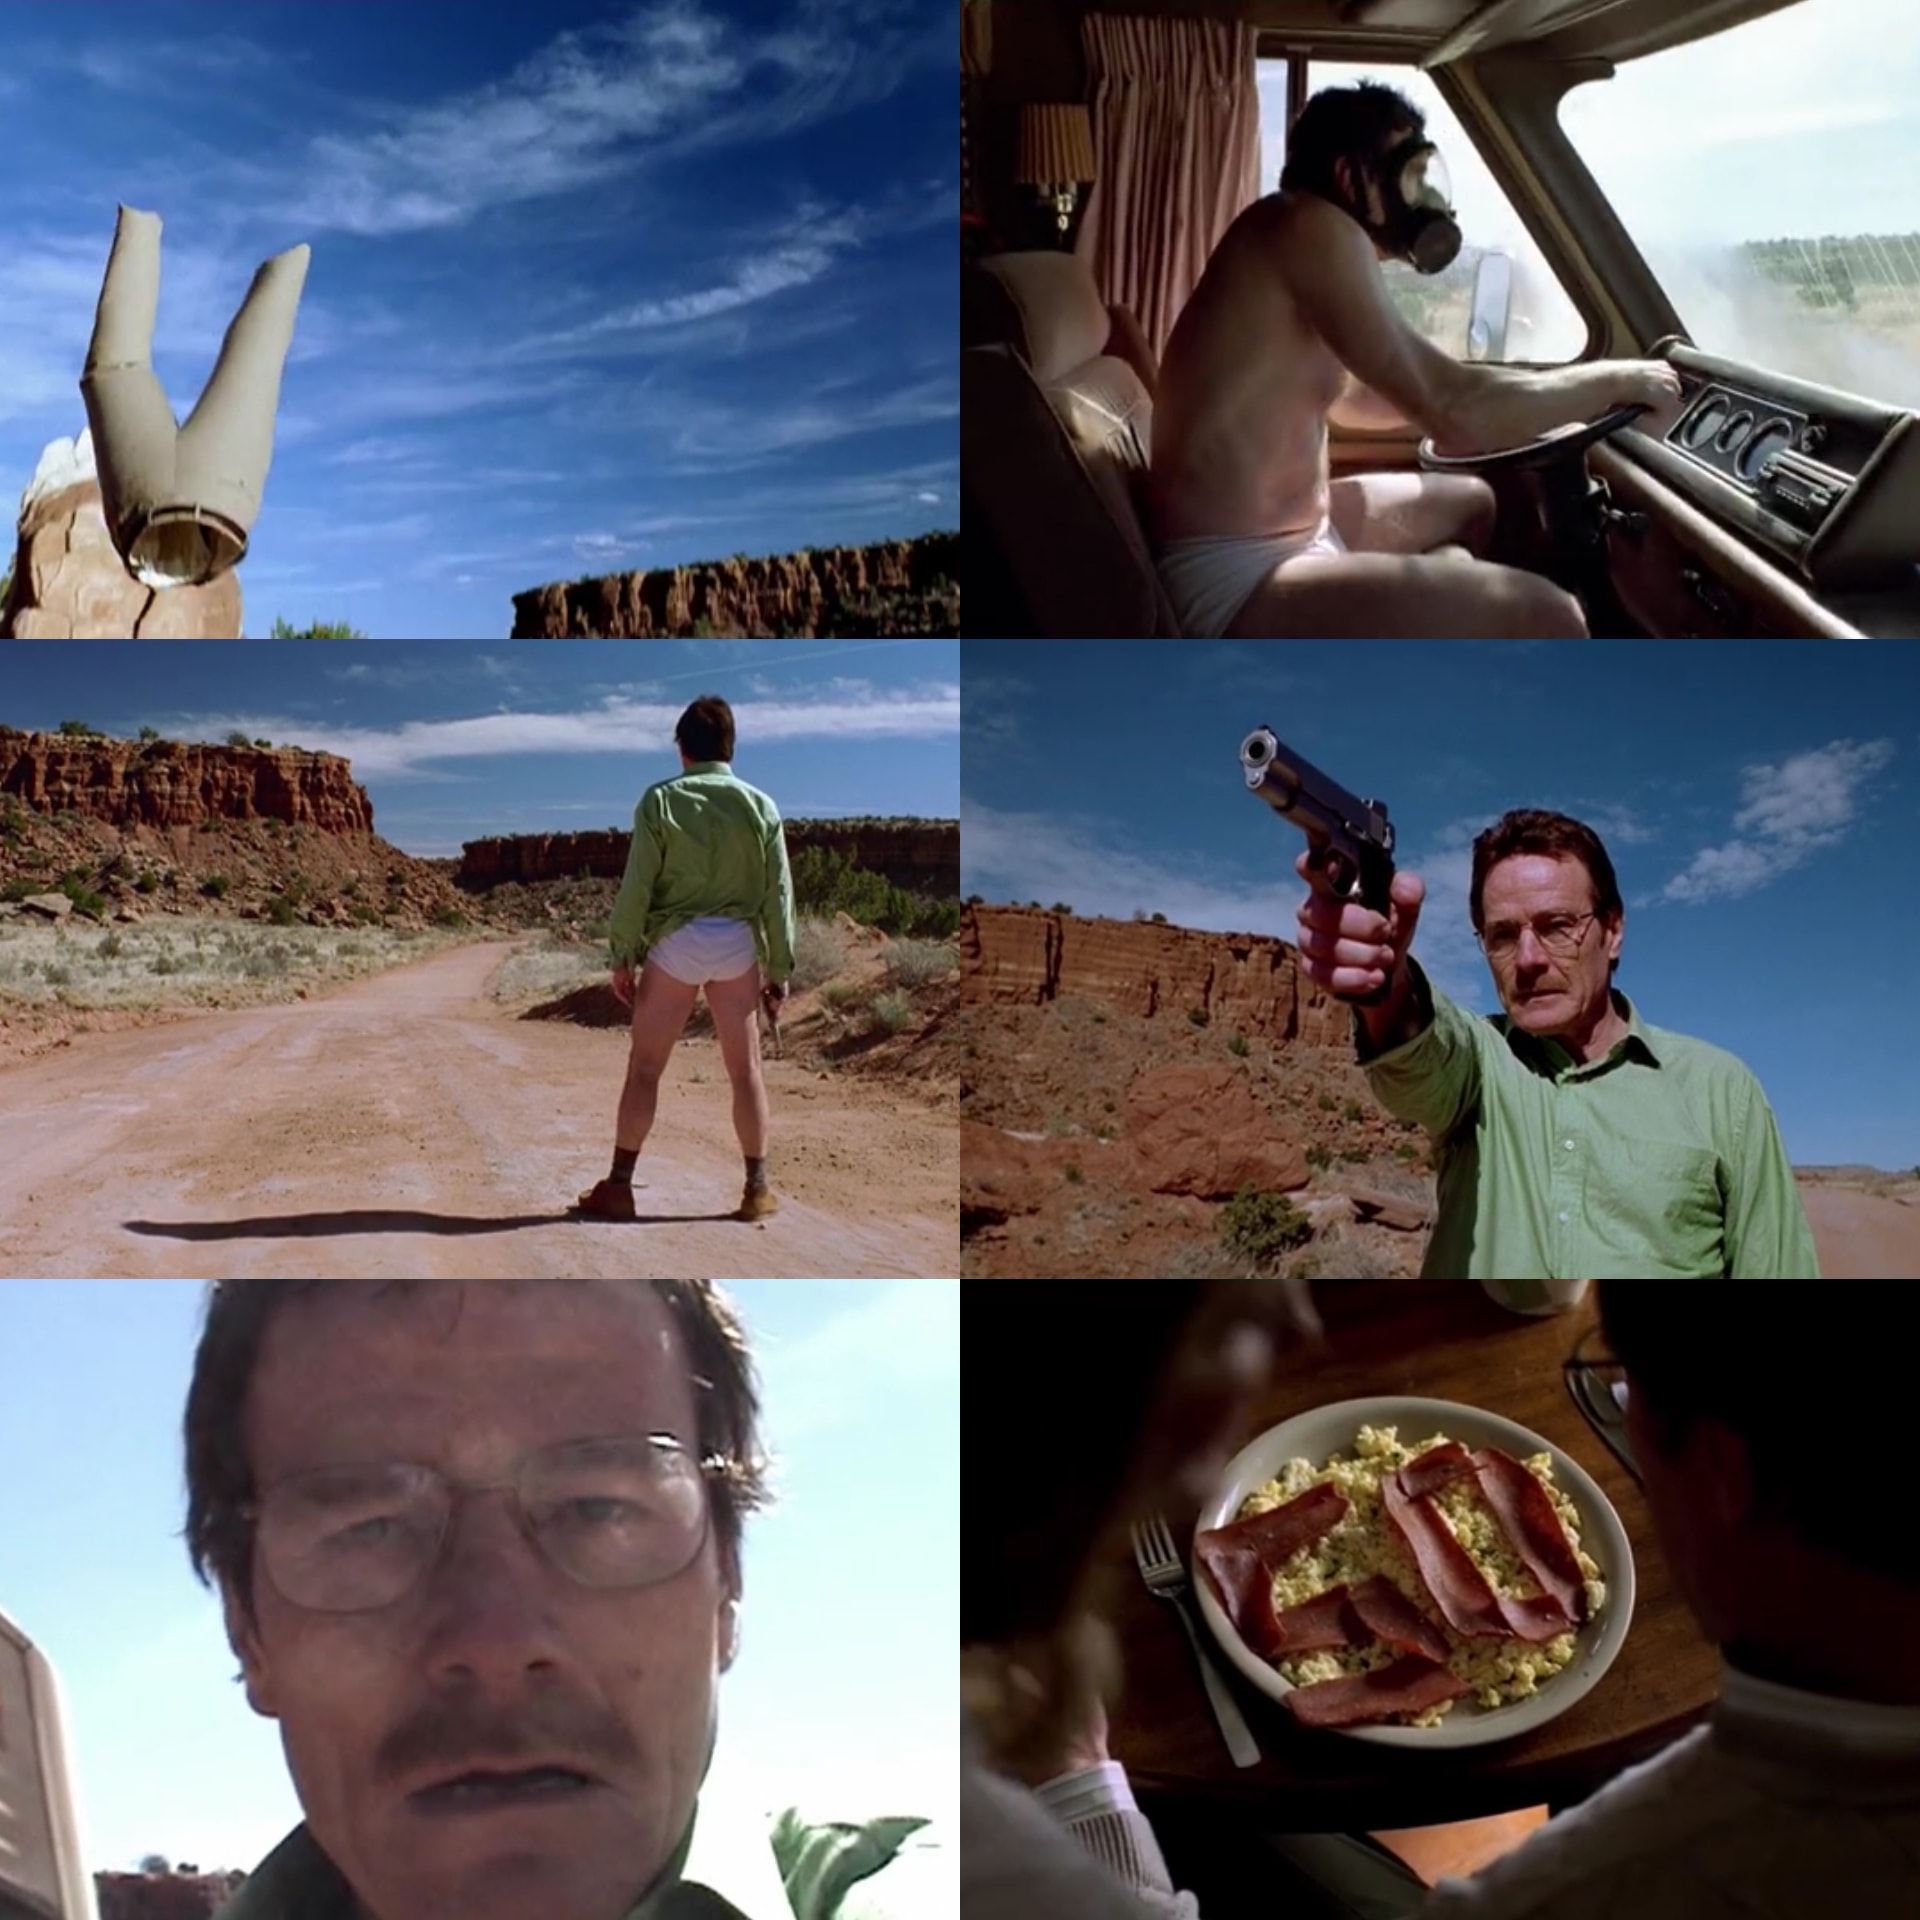 breaking bad years aired